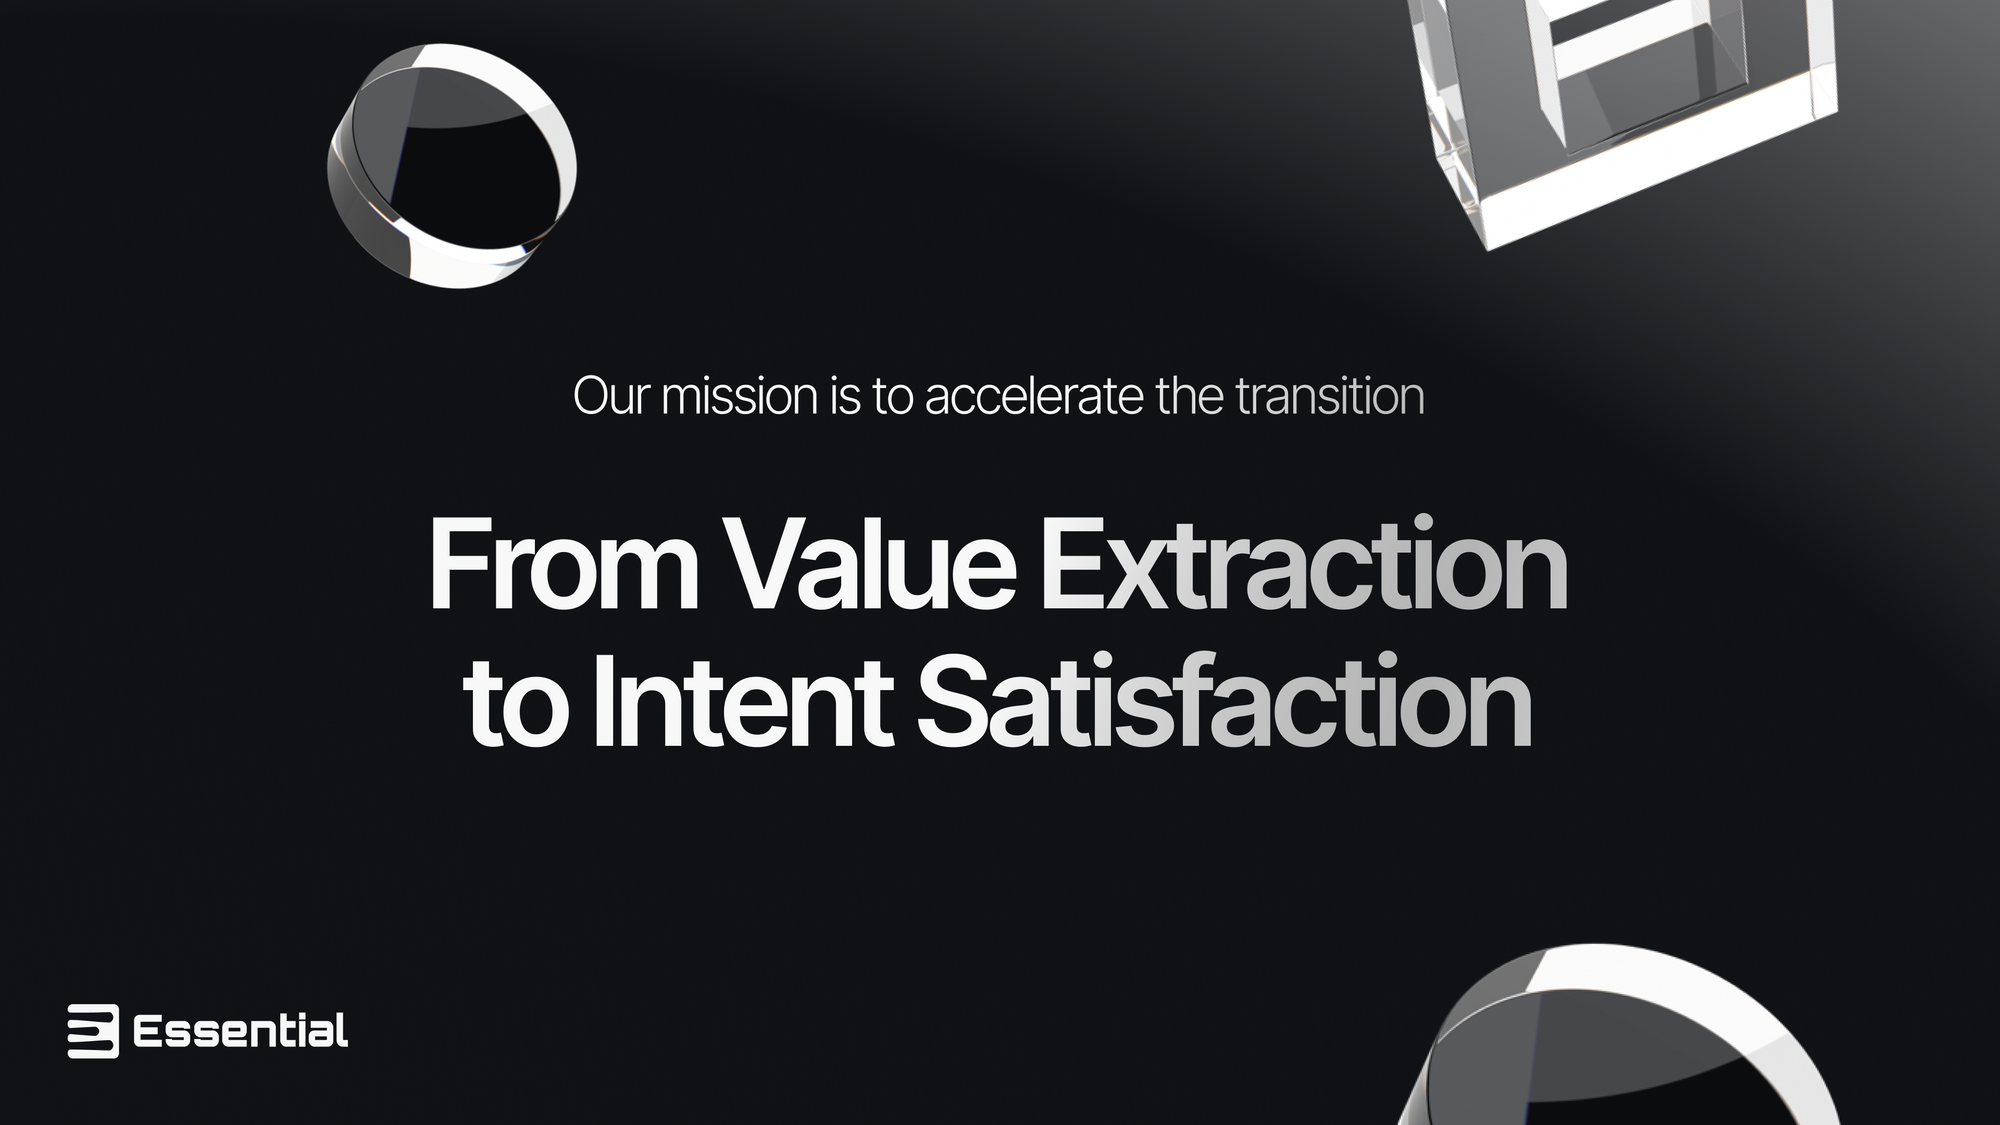 Essential: Our mission is to accelerate the transition from value extraction to intent satisfaction.